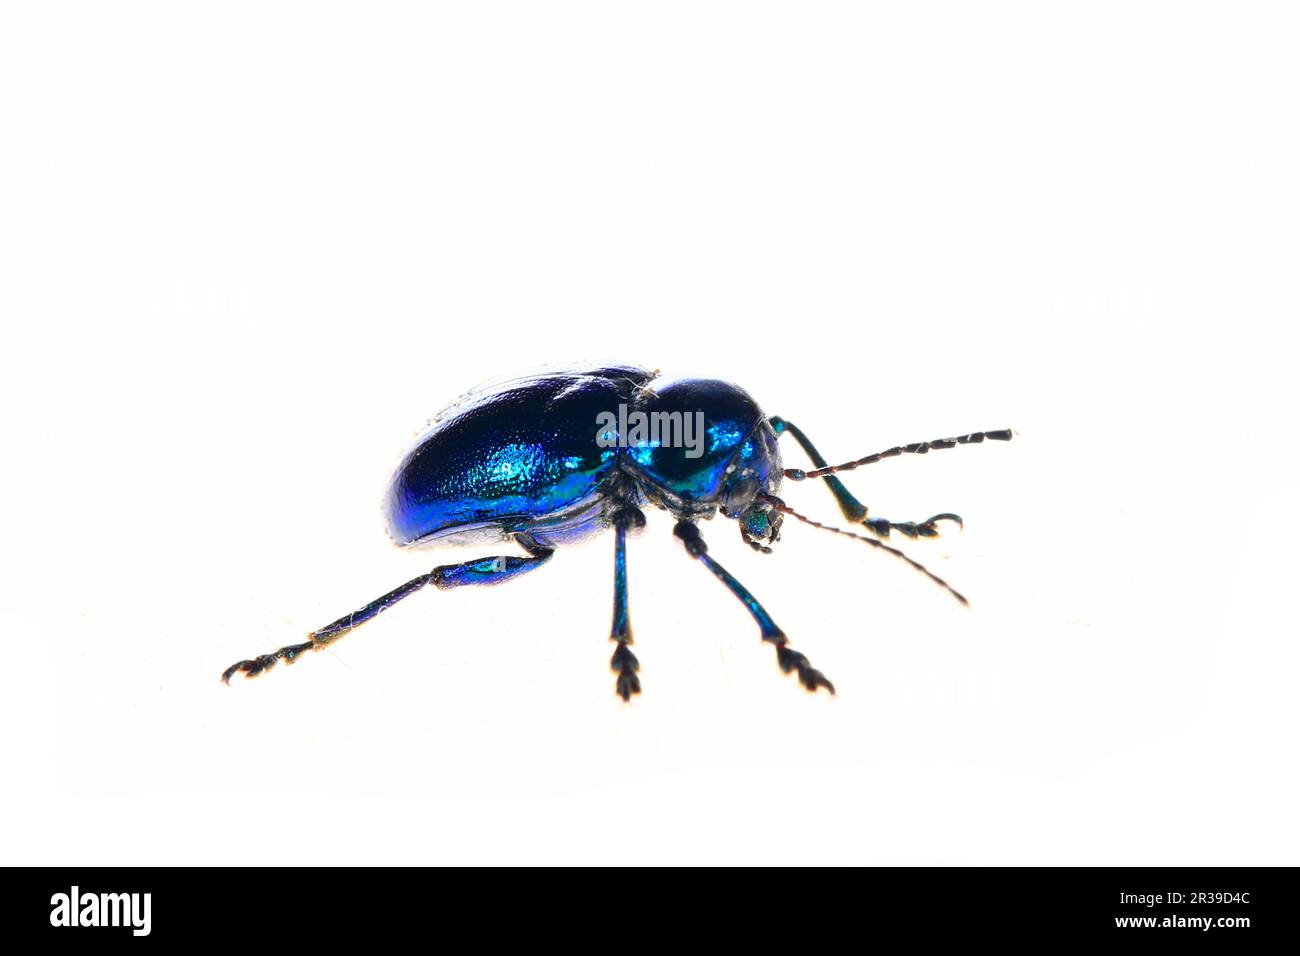 Leaf beetles on a white background, close-up pictures Stock Photo